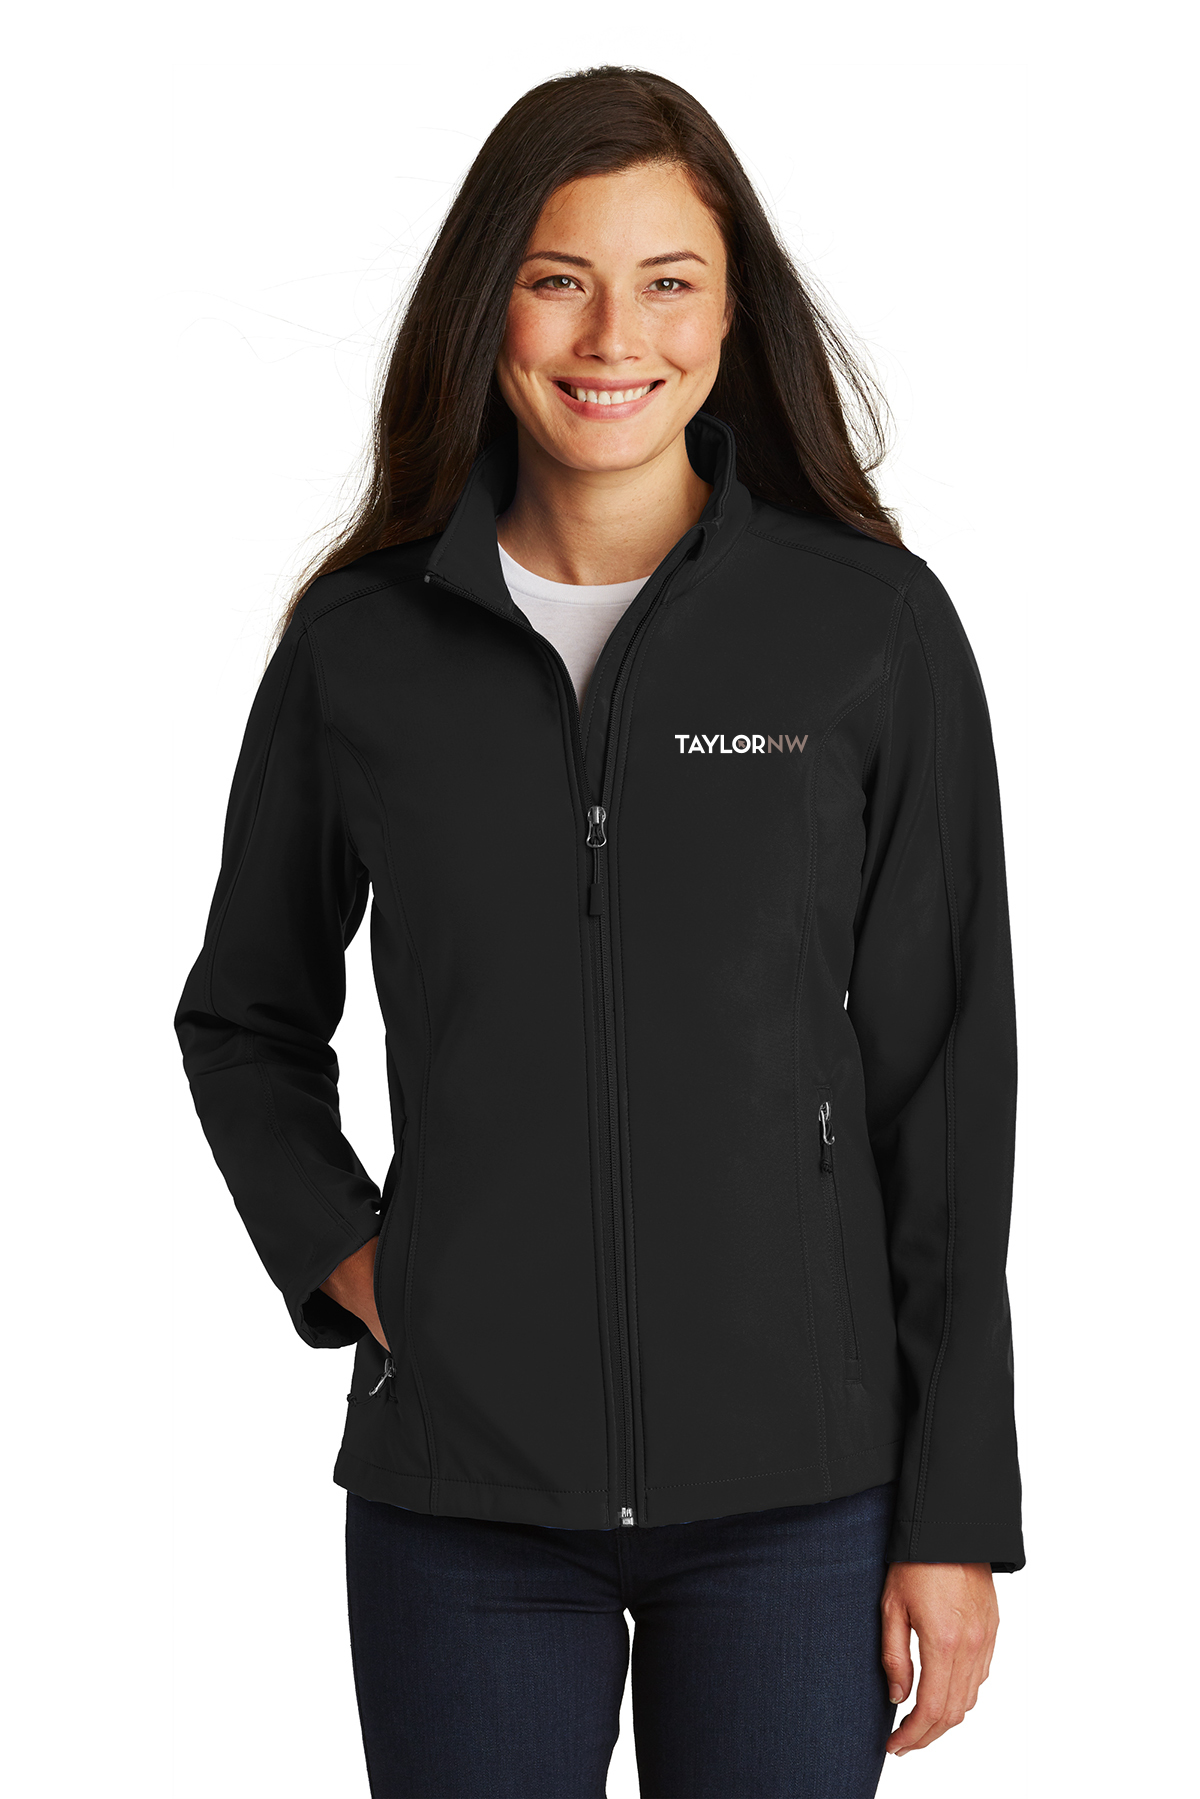 Taylor NW Ladies Soft Shell Jacket